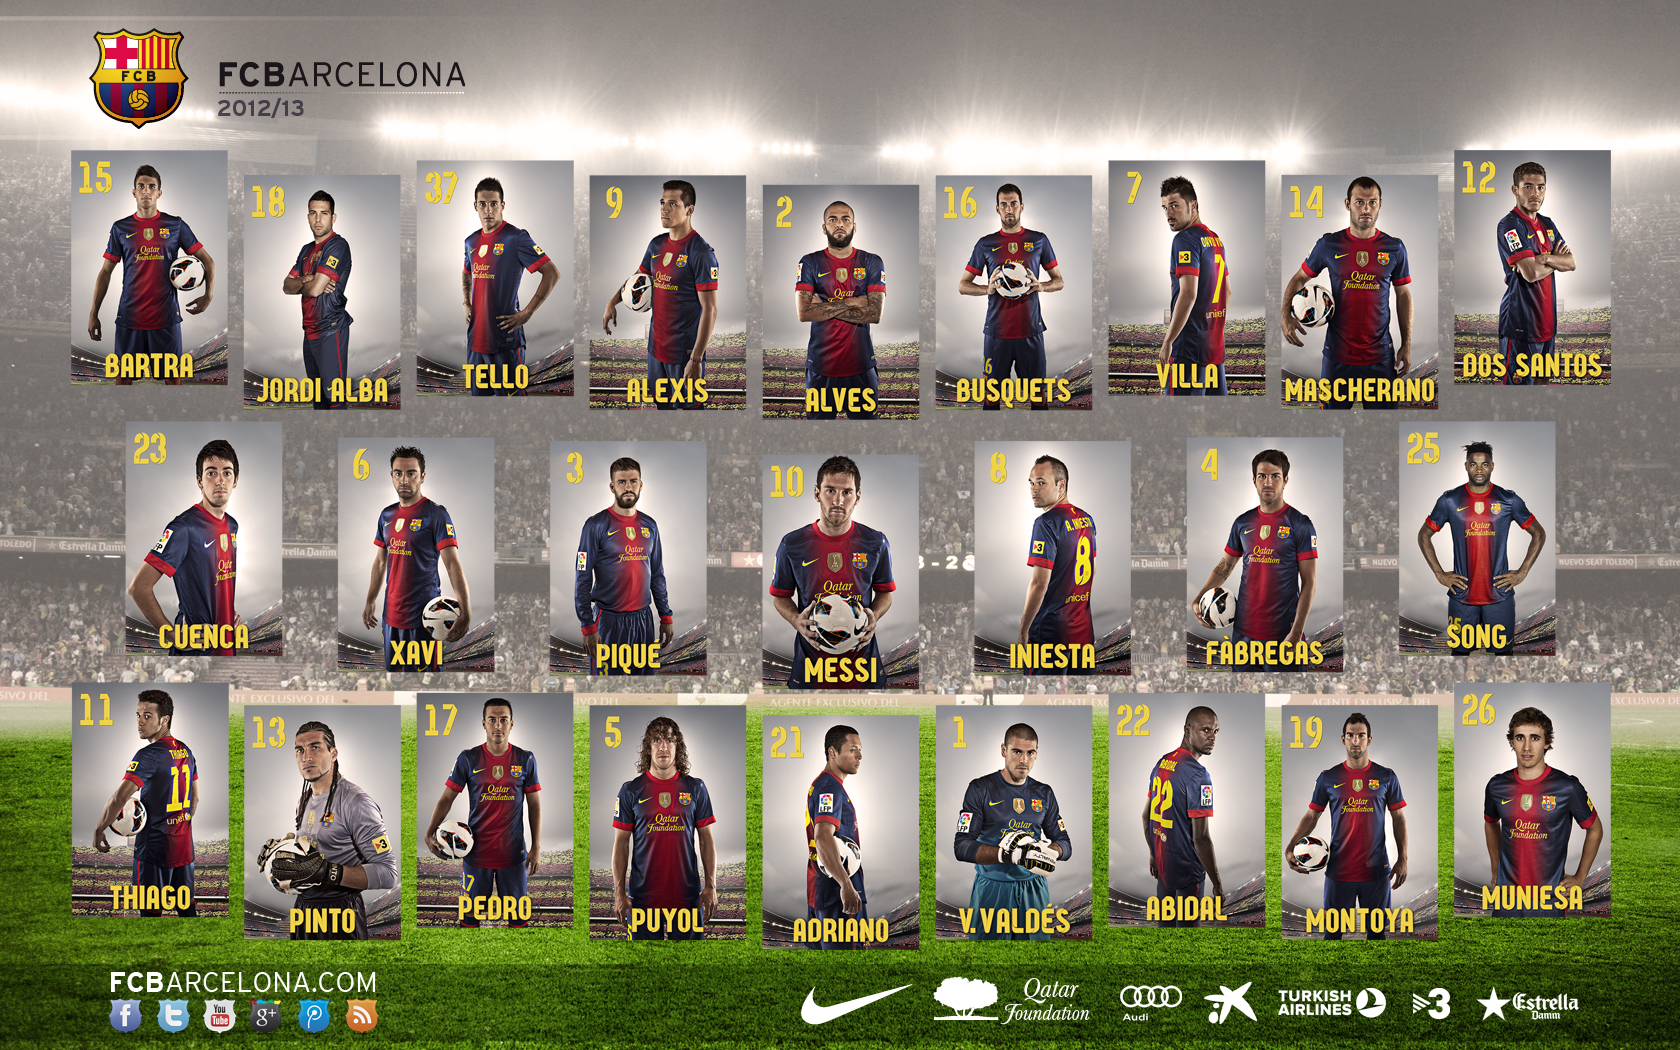 FC Barcelona news and watch match: Barca HD Wallpapers1680 x 1050